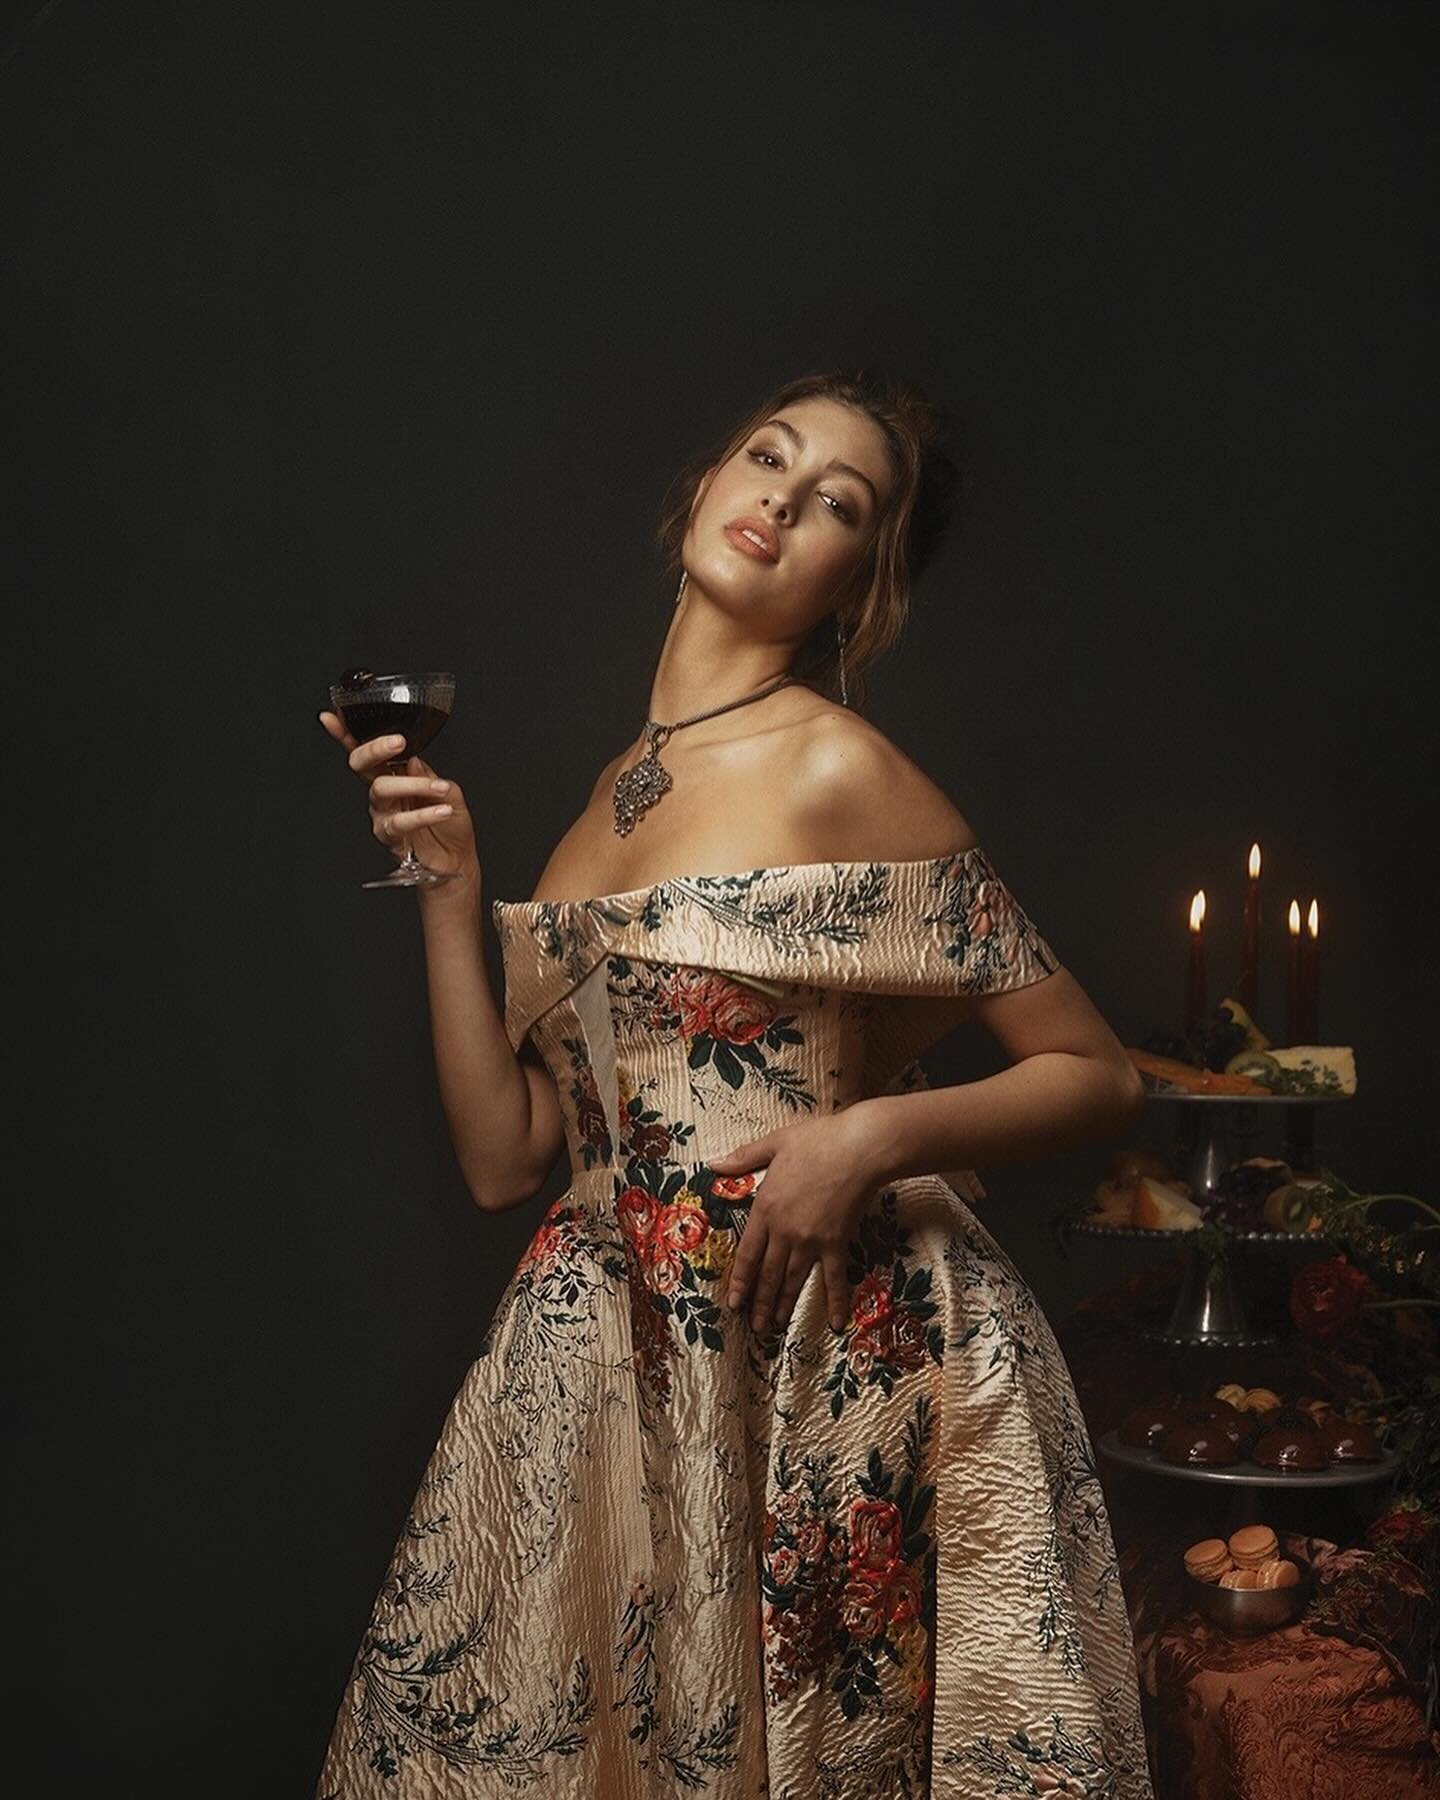 feeling peachy keen with flora + she is giving us allllllllll the vibes:

🍷 floral or ivory jacquard
🍇 a-line silhouette 
🕯️ detachable off-the-shoulder tie

ready to bloom in this beauty? secure your moment by clicking the link in bio 🥂
.
.
.
.
